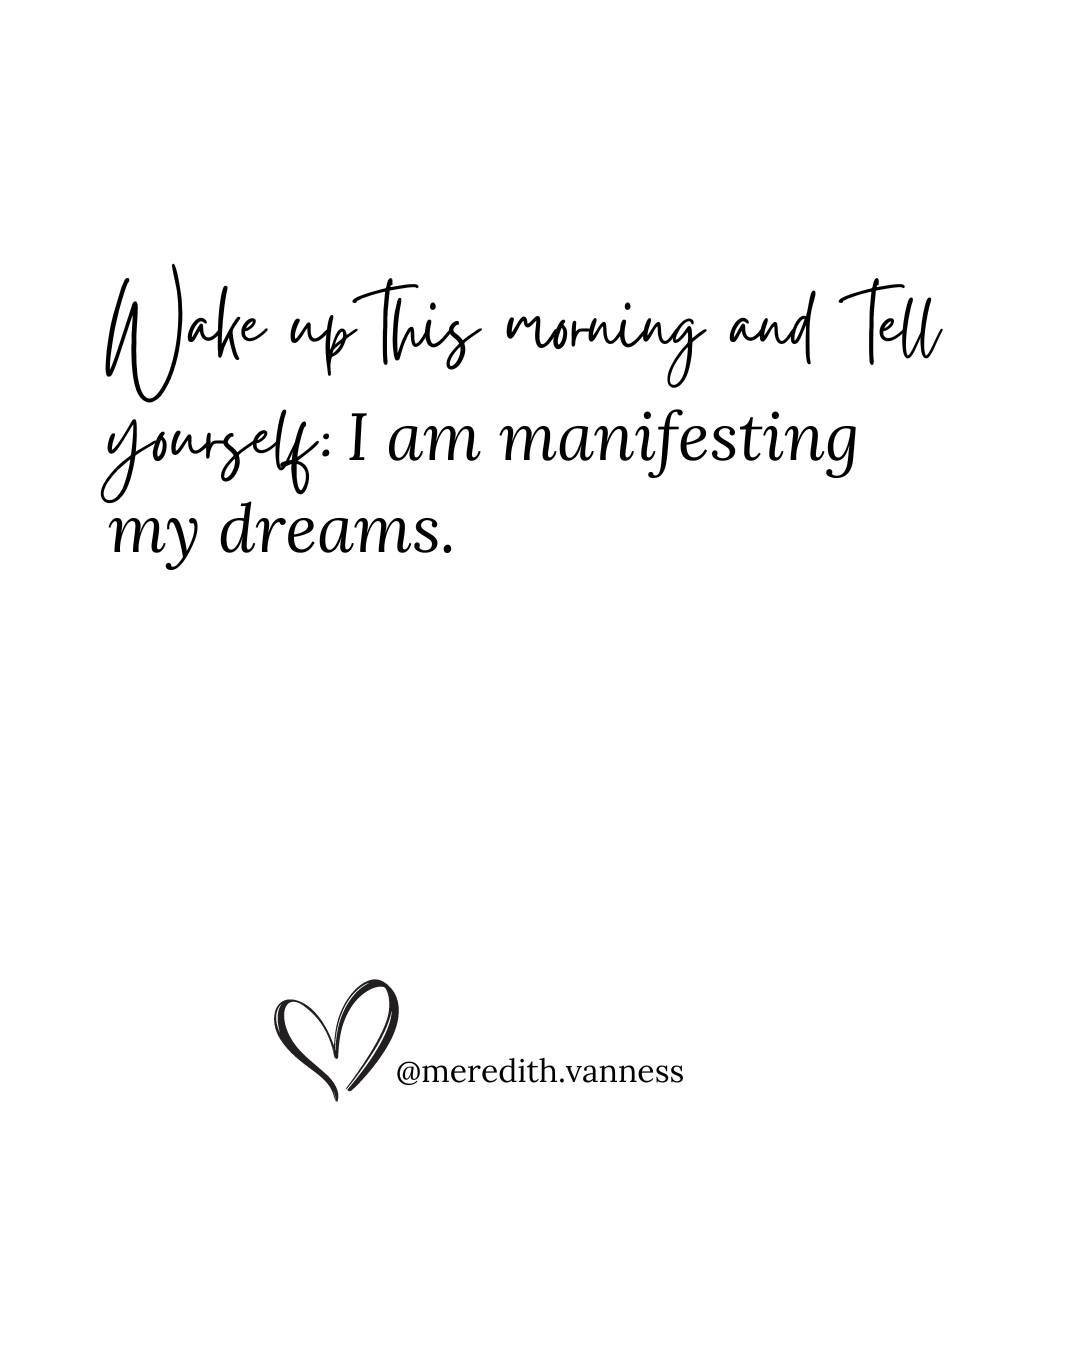 Wake up today and remind yourself: you are manifesting your dreams! ✨⁠
⁠
Manifesting is about attracting what you desire by focusing your thoughts and intentions. Science even backs this up!⁠
⁠
Here's the key: Positive thoughts grab your brain's atte